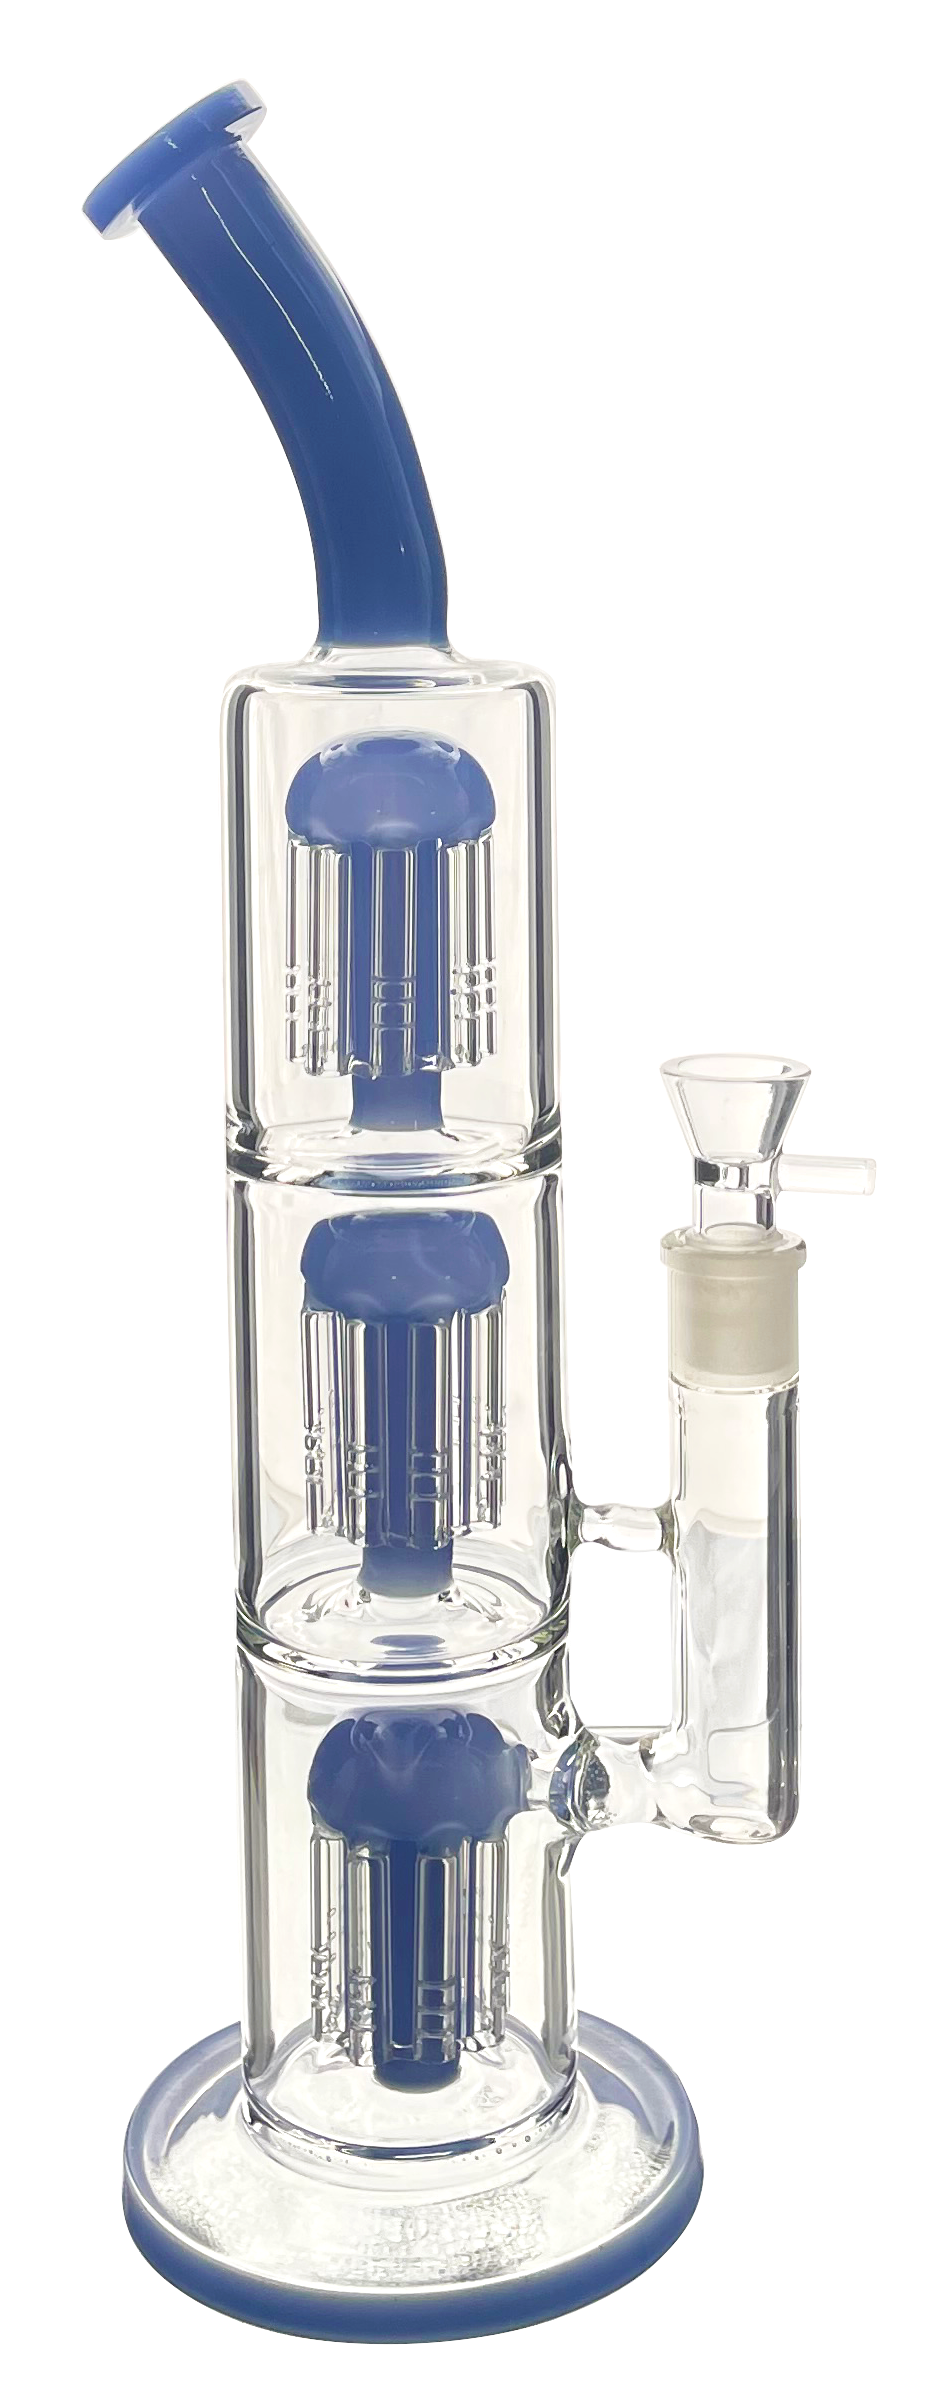 BEND COLOR MOUTHPIECE WITH TRIPLE TREE PERC - Limitless Puff